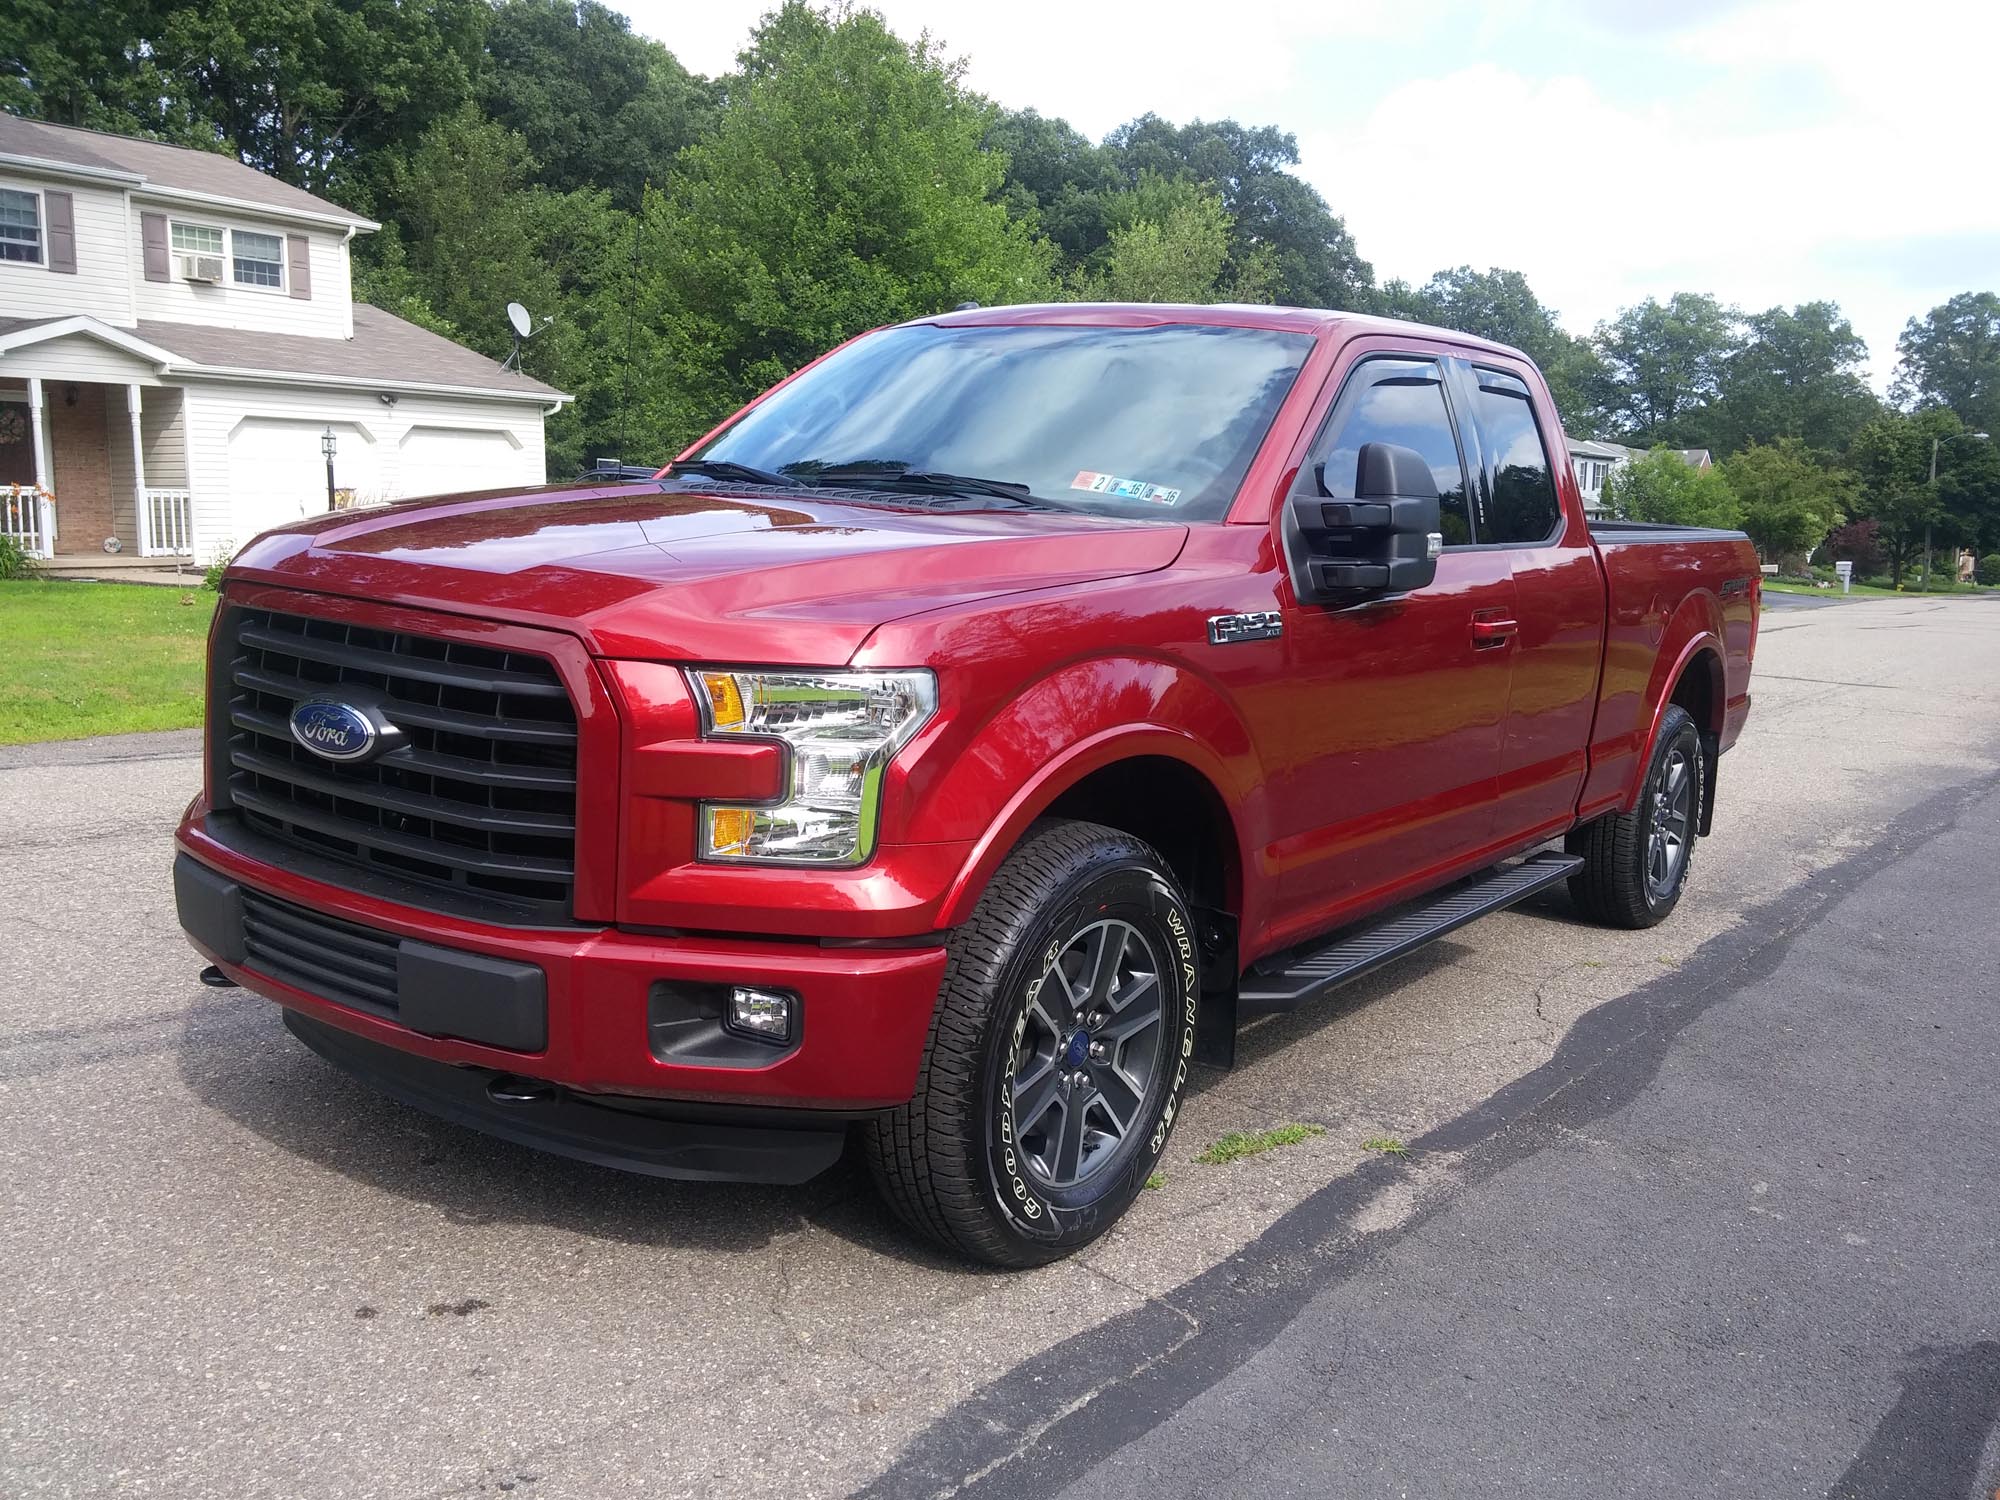 Red F150